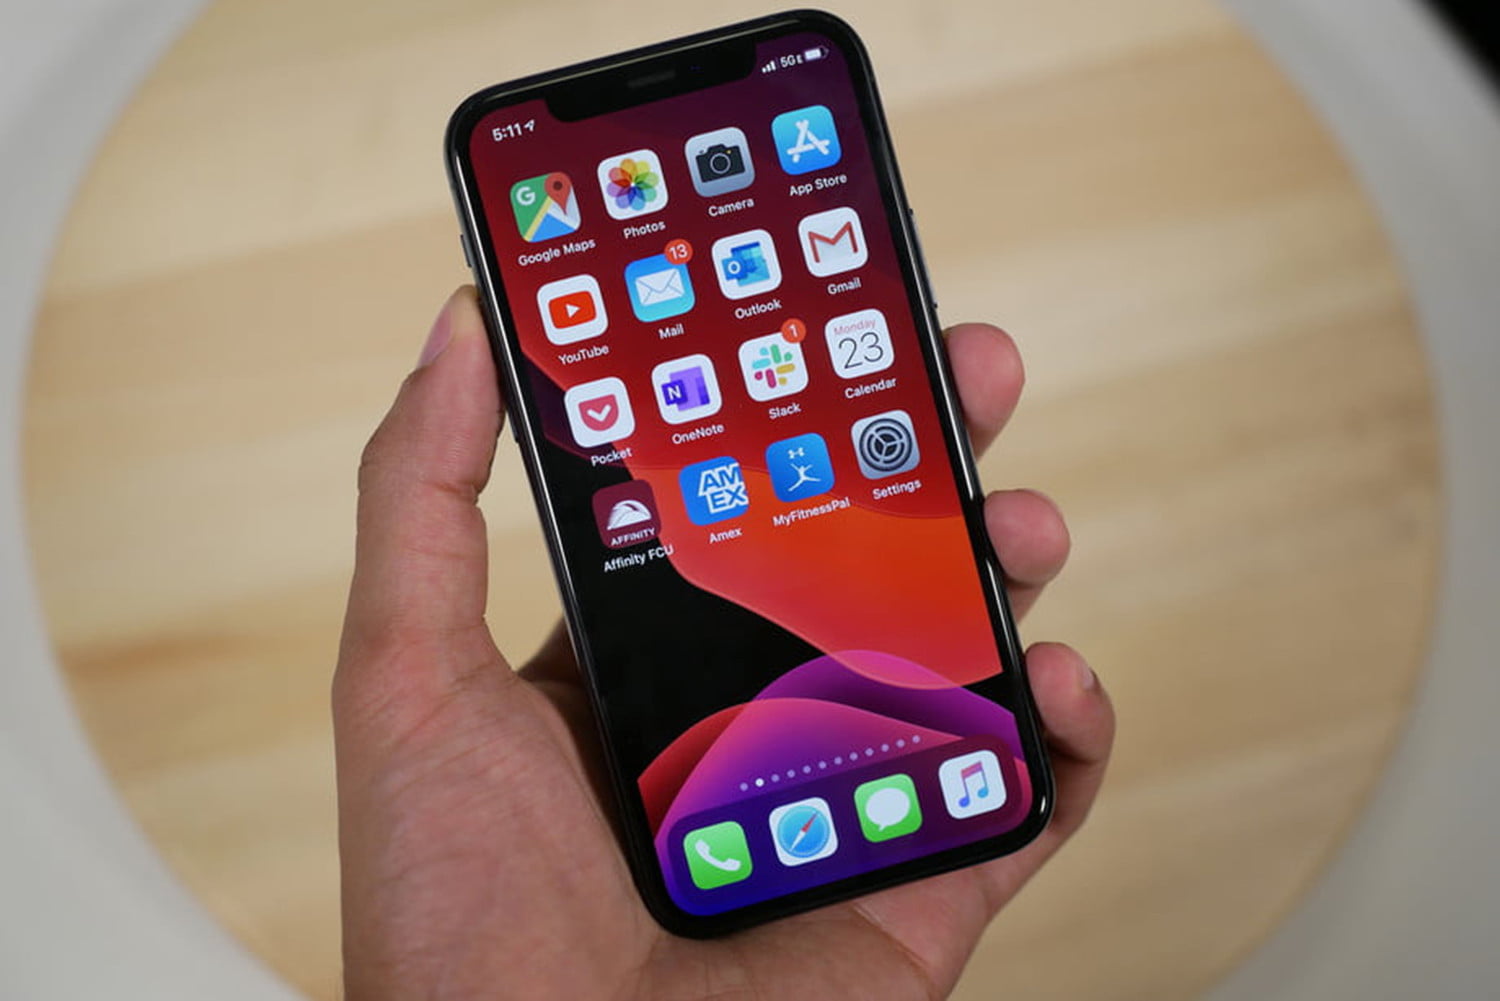 If your Iphone11 touch screen has problems, the company offers free display replacement